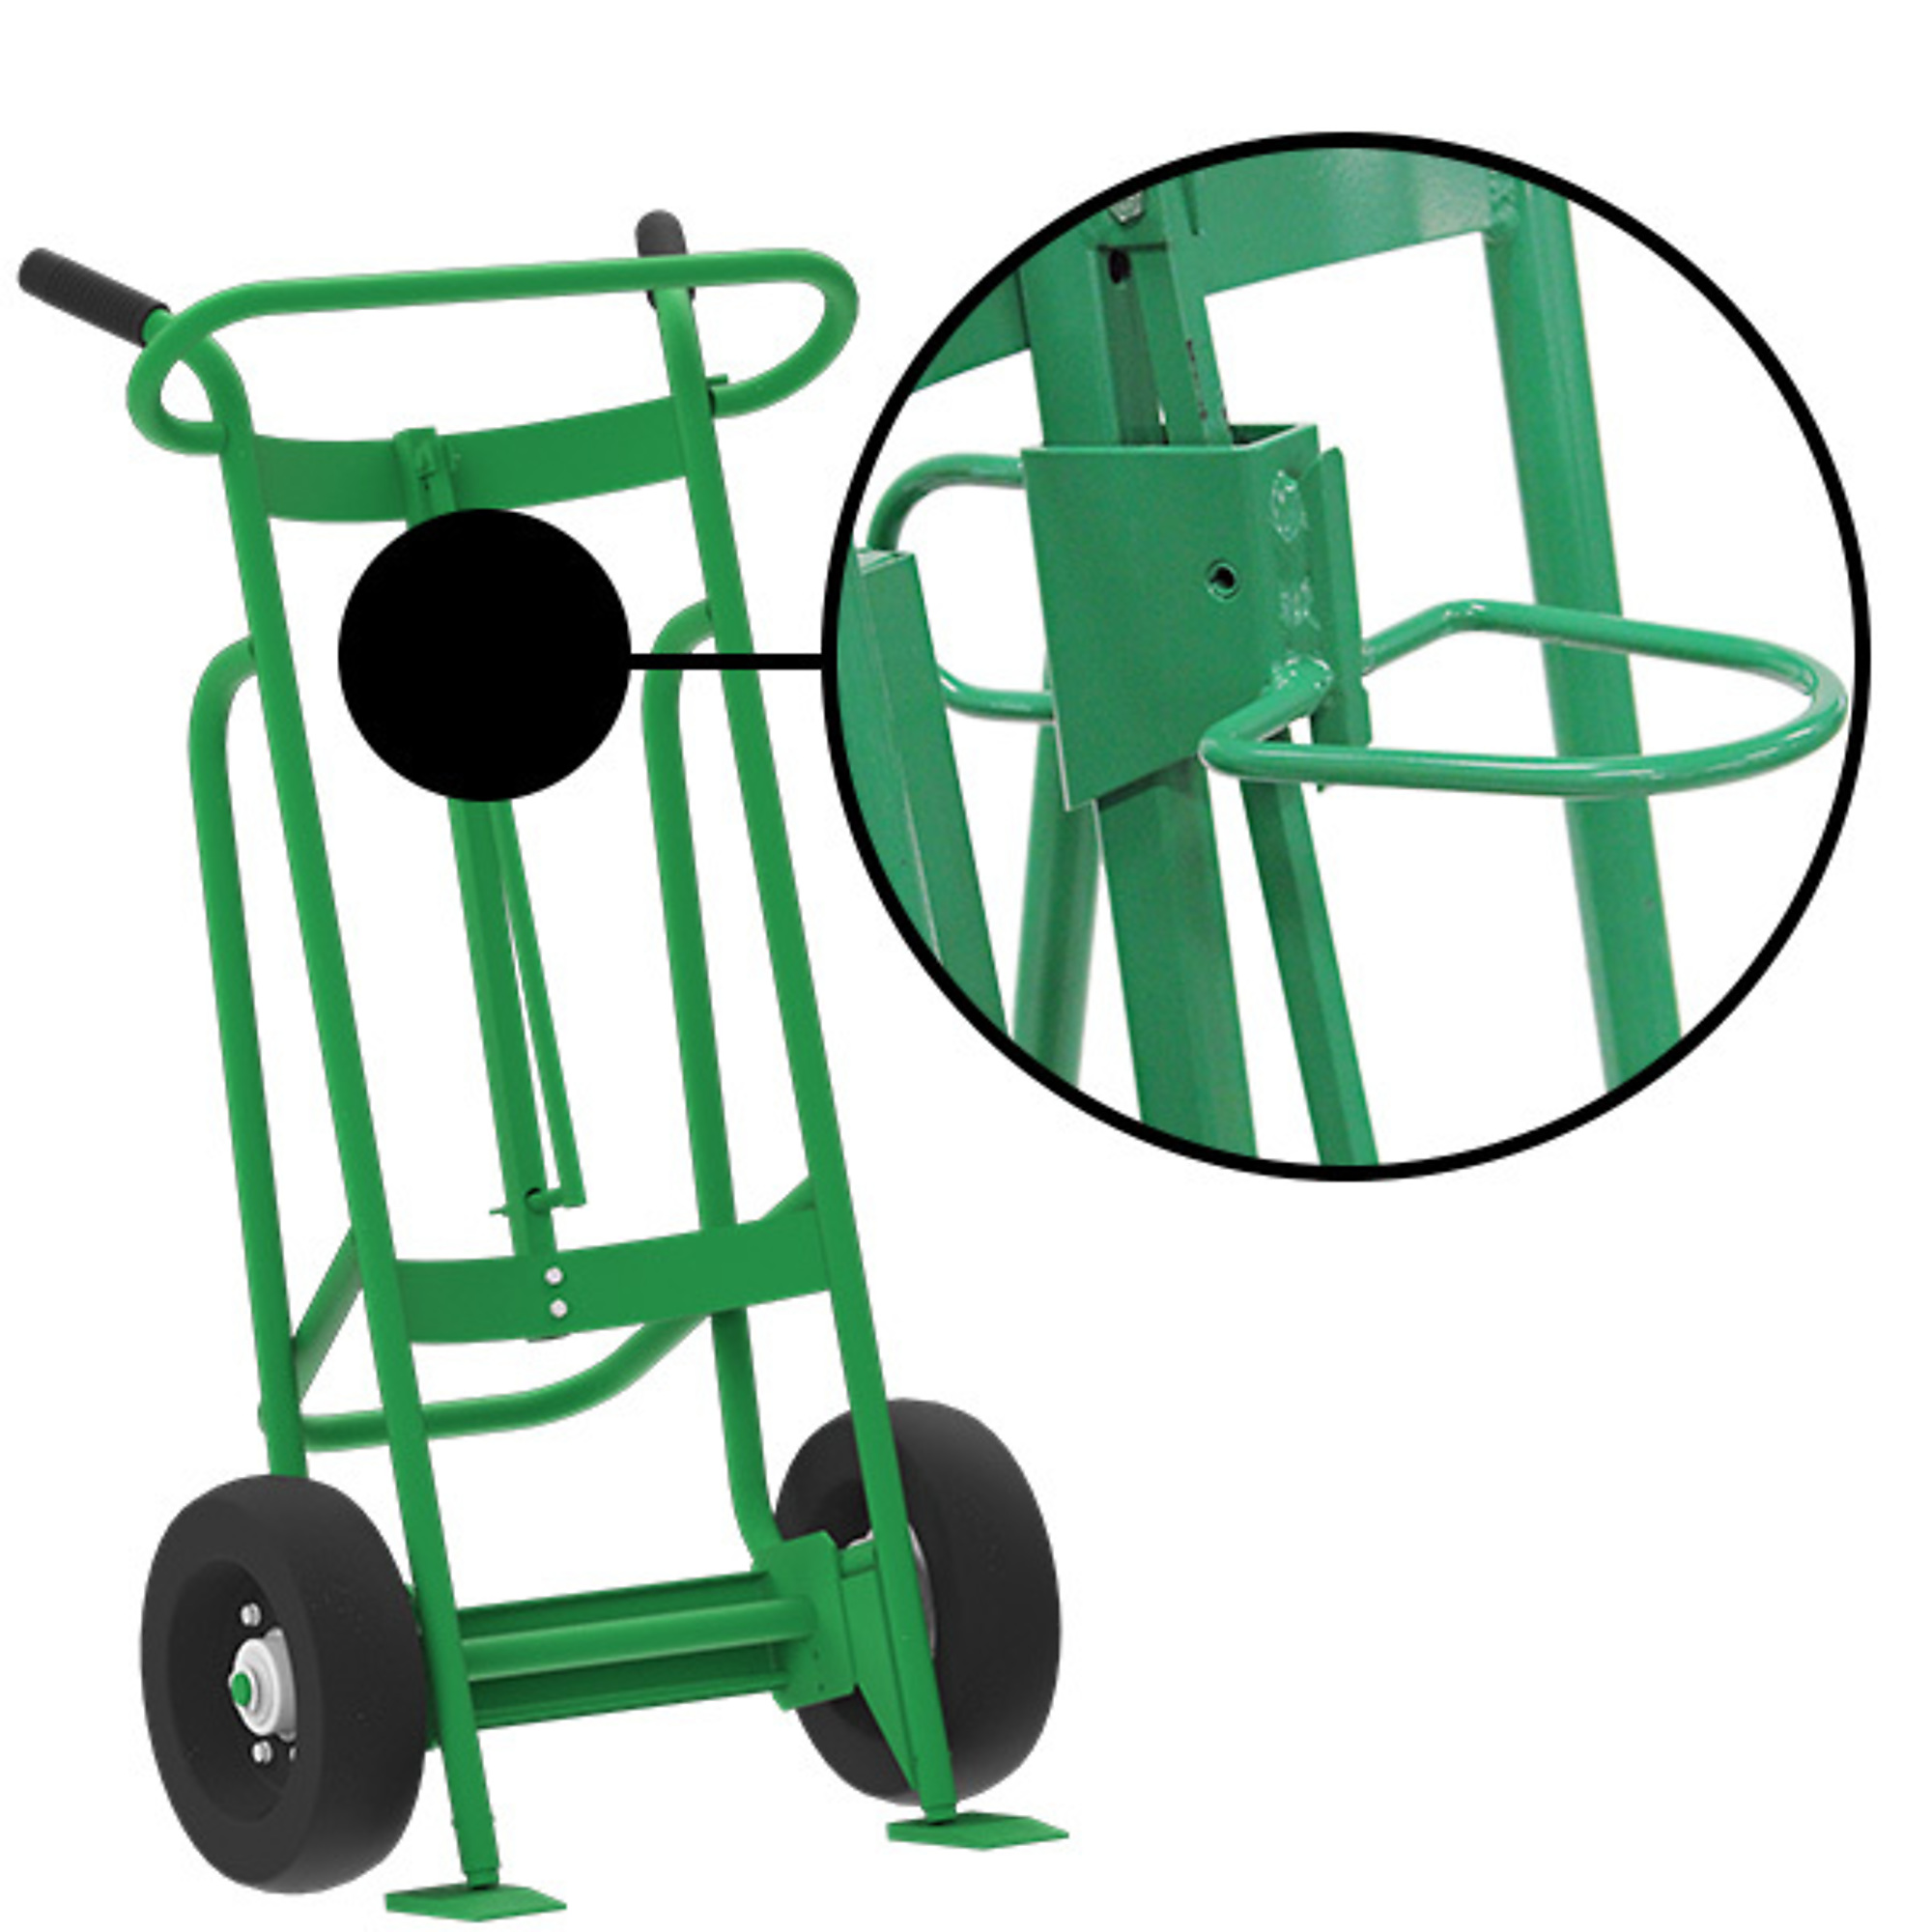 Valley Craft, 2-Wheel Drum Hand Truck, Load Capacity 1000 lb, Height 52 in, Material Steel, Model F82025A4P